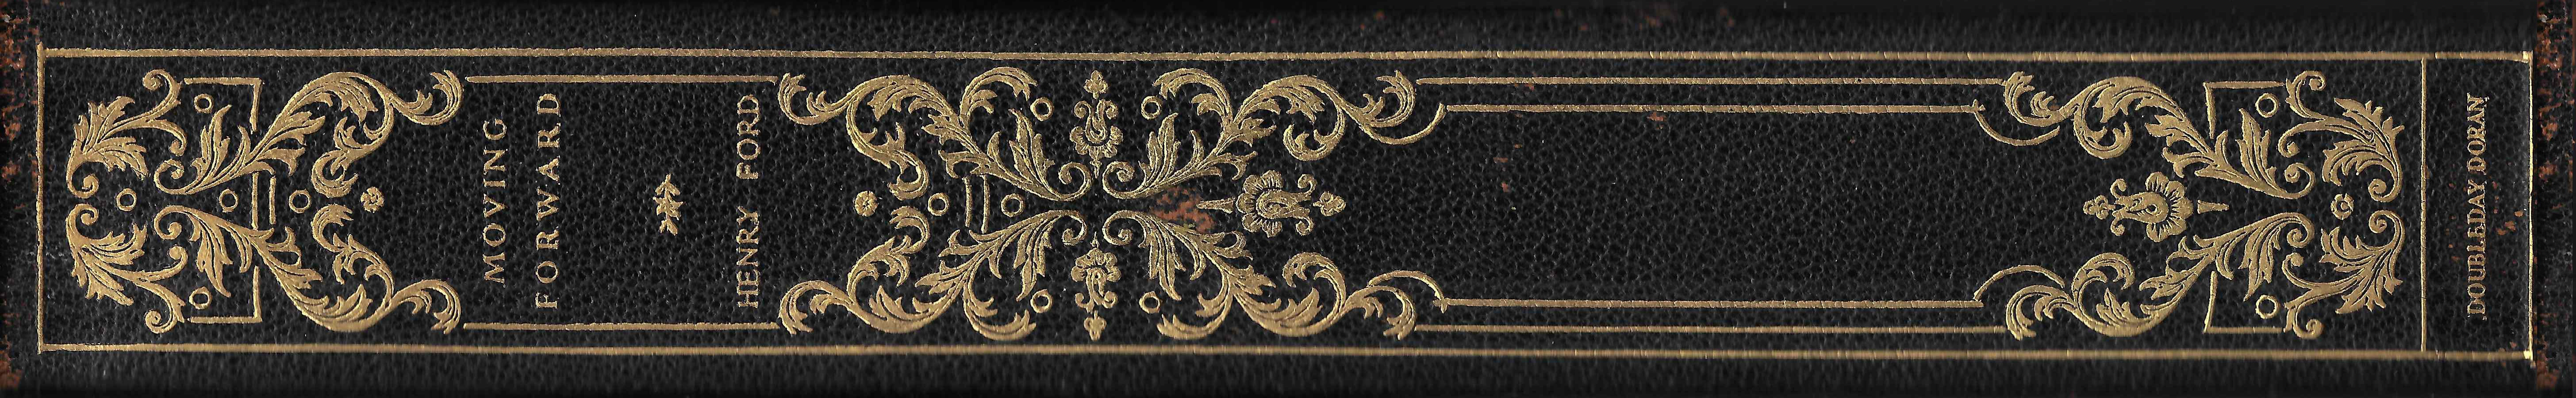 Image of the spine of Henry Ford's and Samuel Crowther's book, 